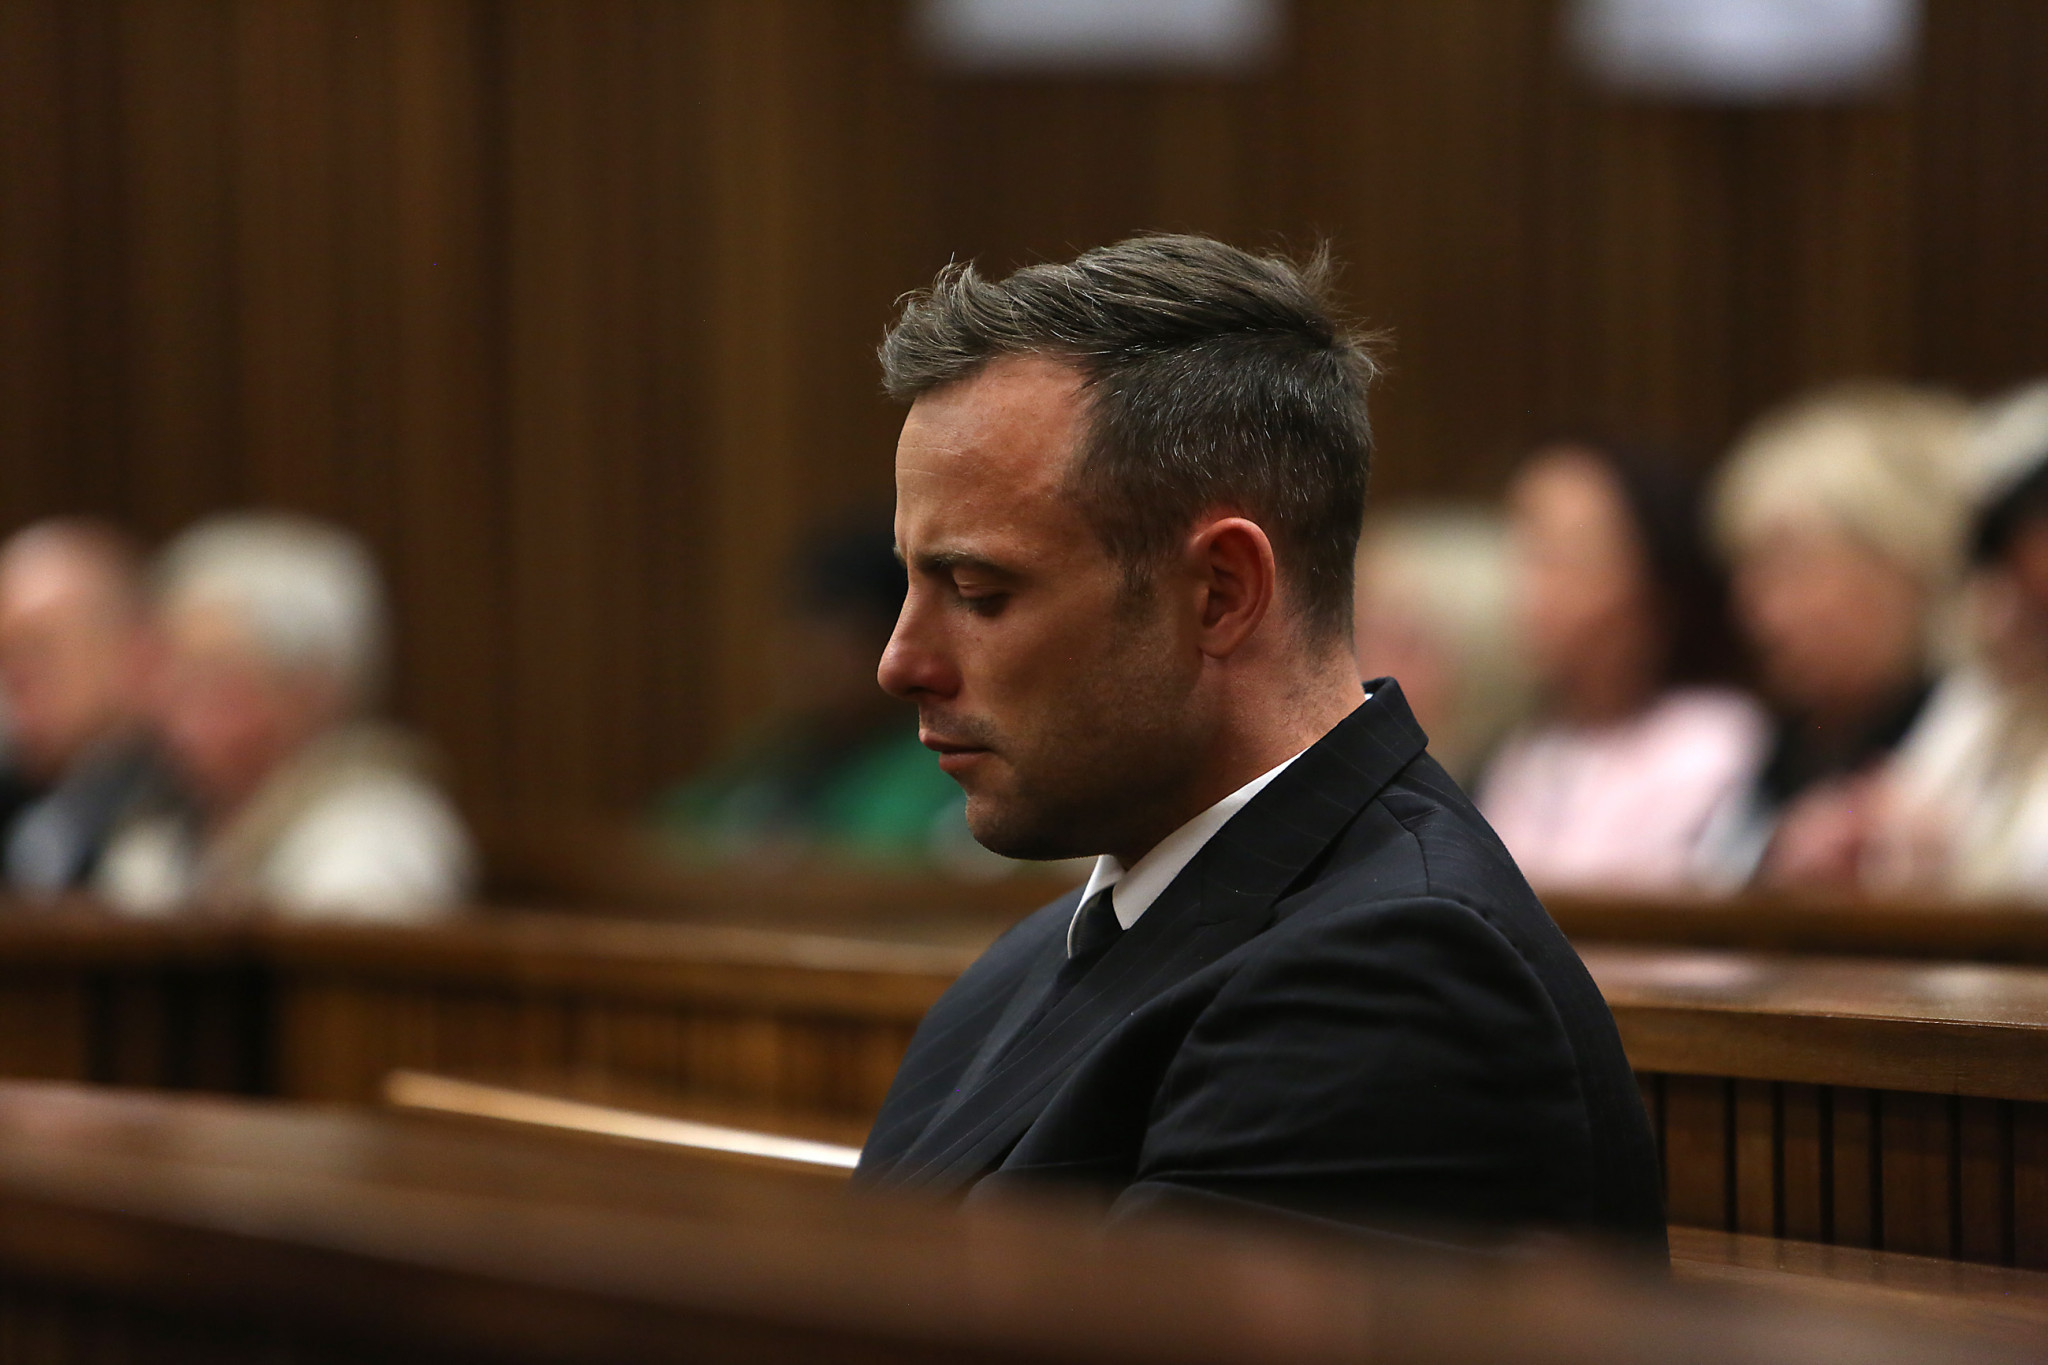 Oscar Pistorius' prison sentence for the murder of Reeva Steenkamp was increased to 13 years and five months in 2017 ©Getty Images